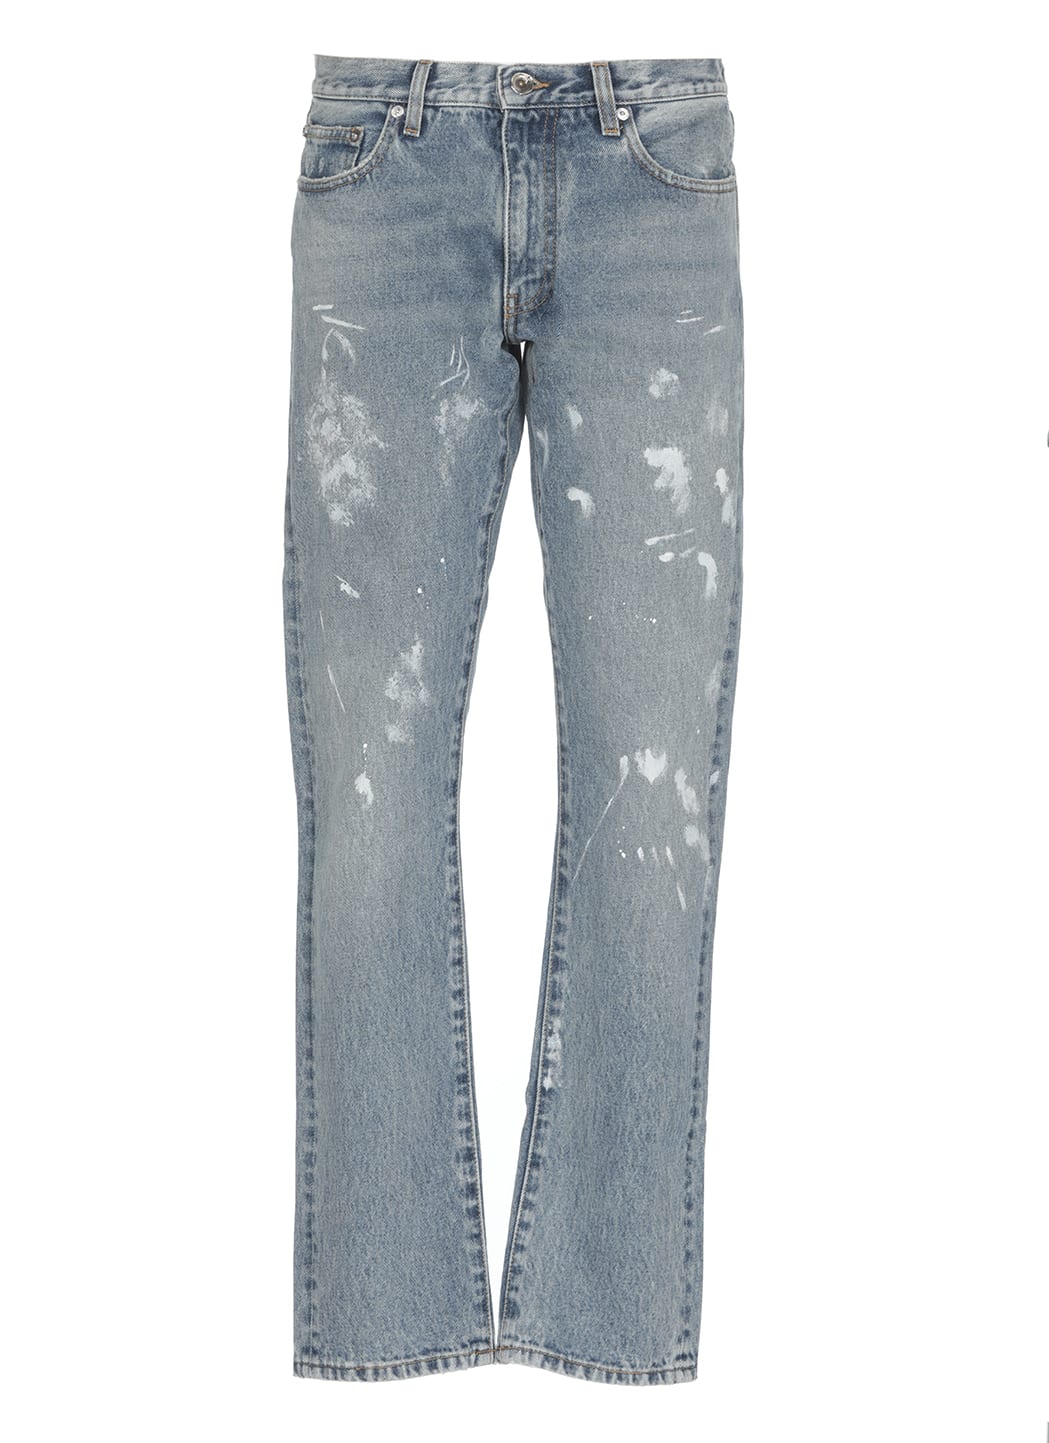 Off-White Diag Outline Jeans